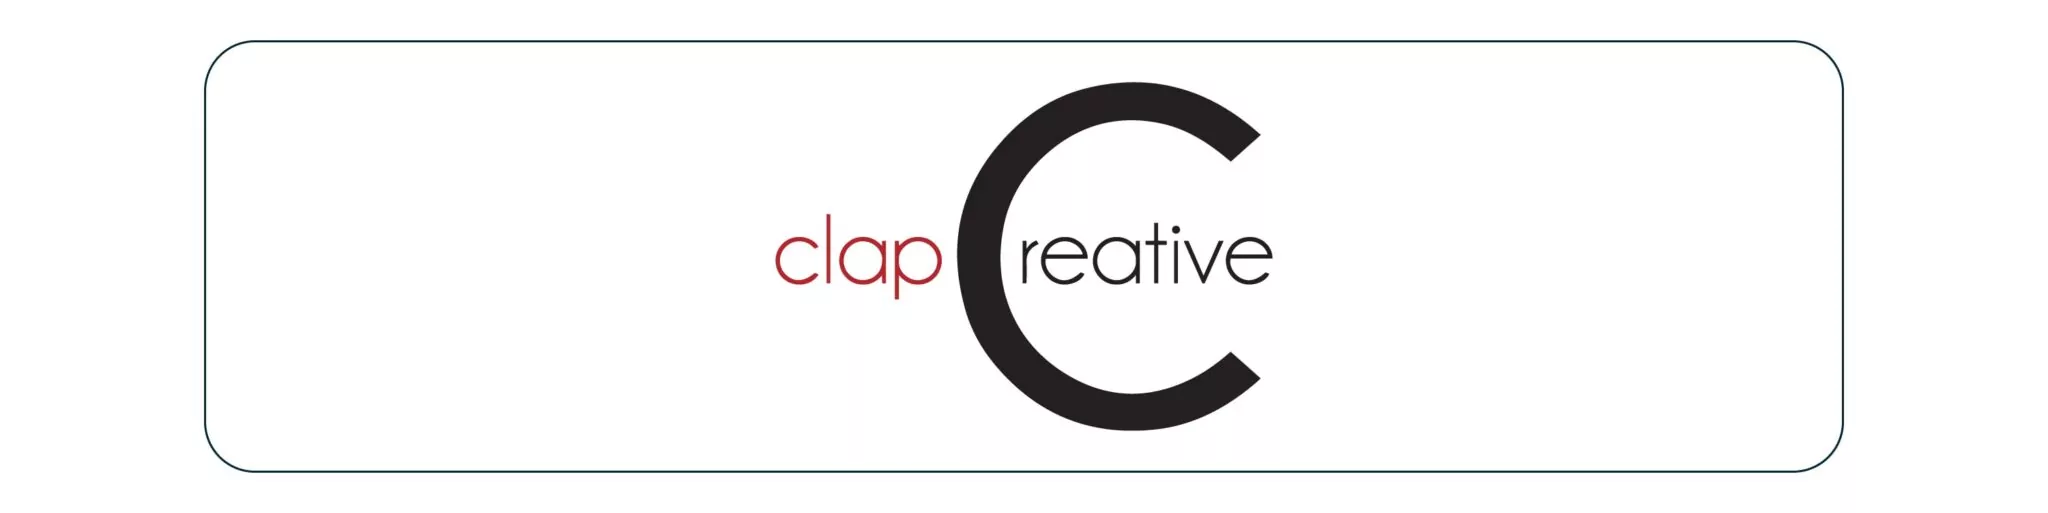 Clap Creative is the best SaaS development company on the US market